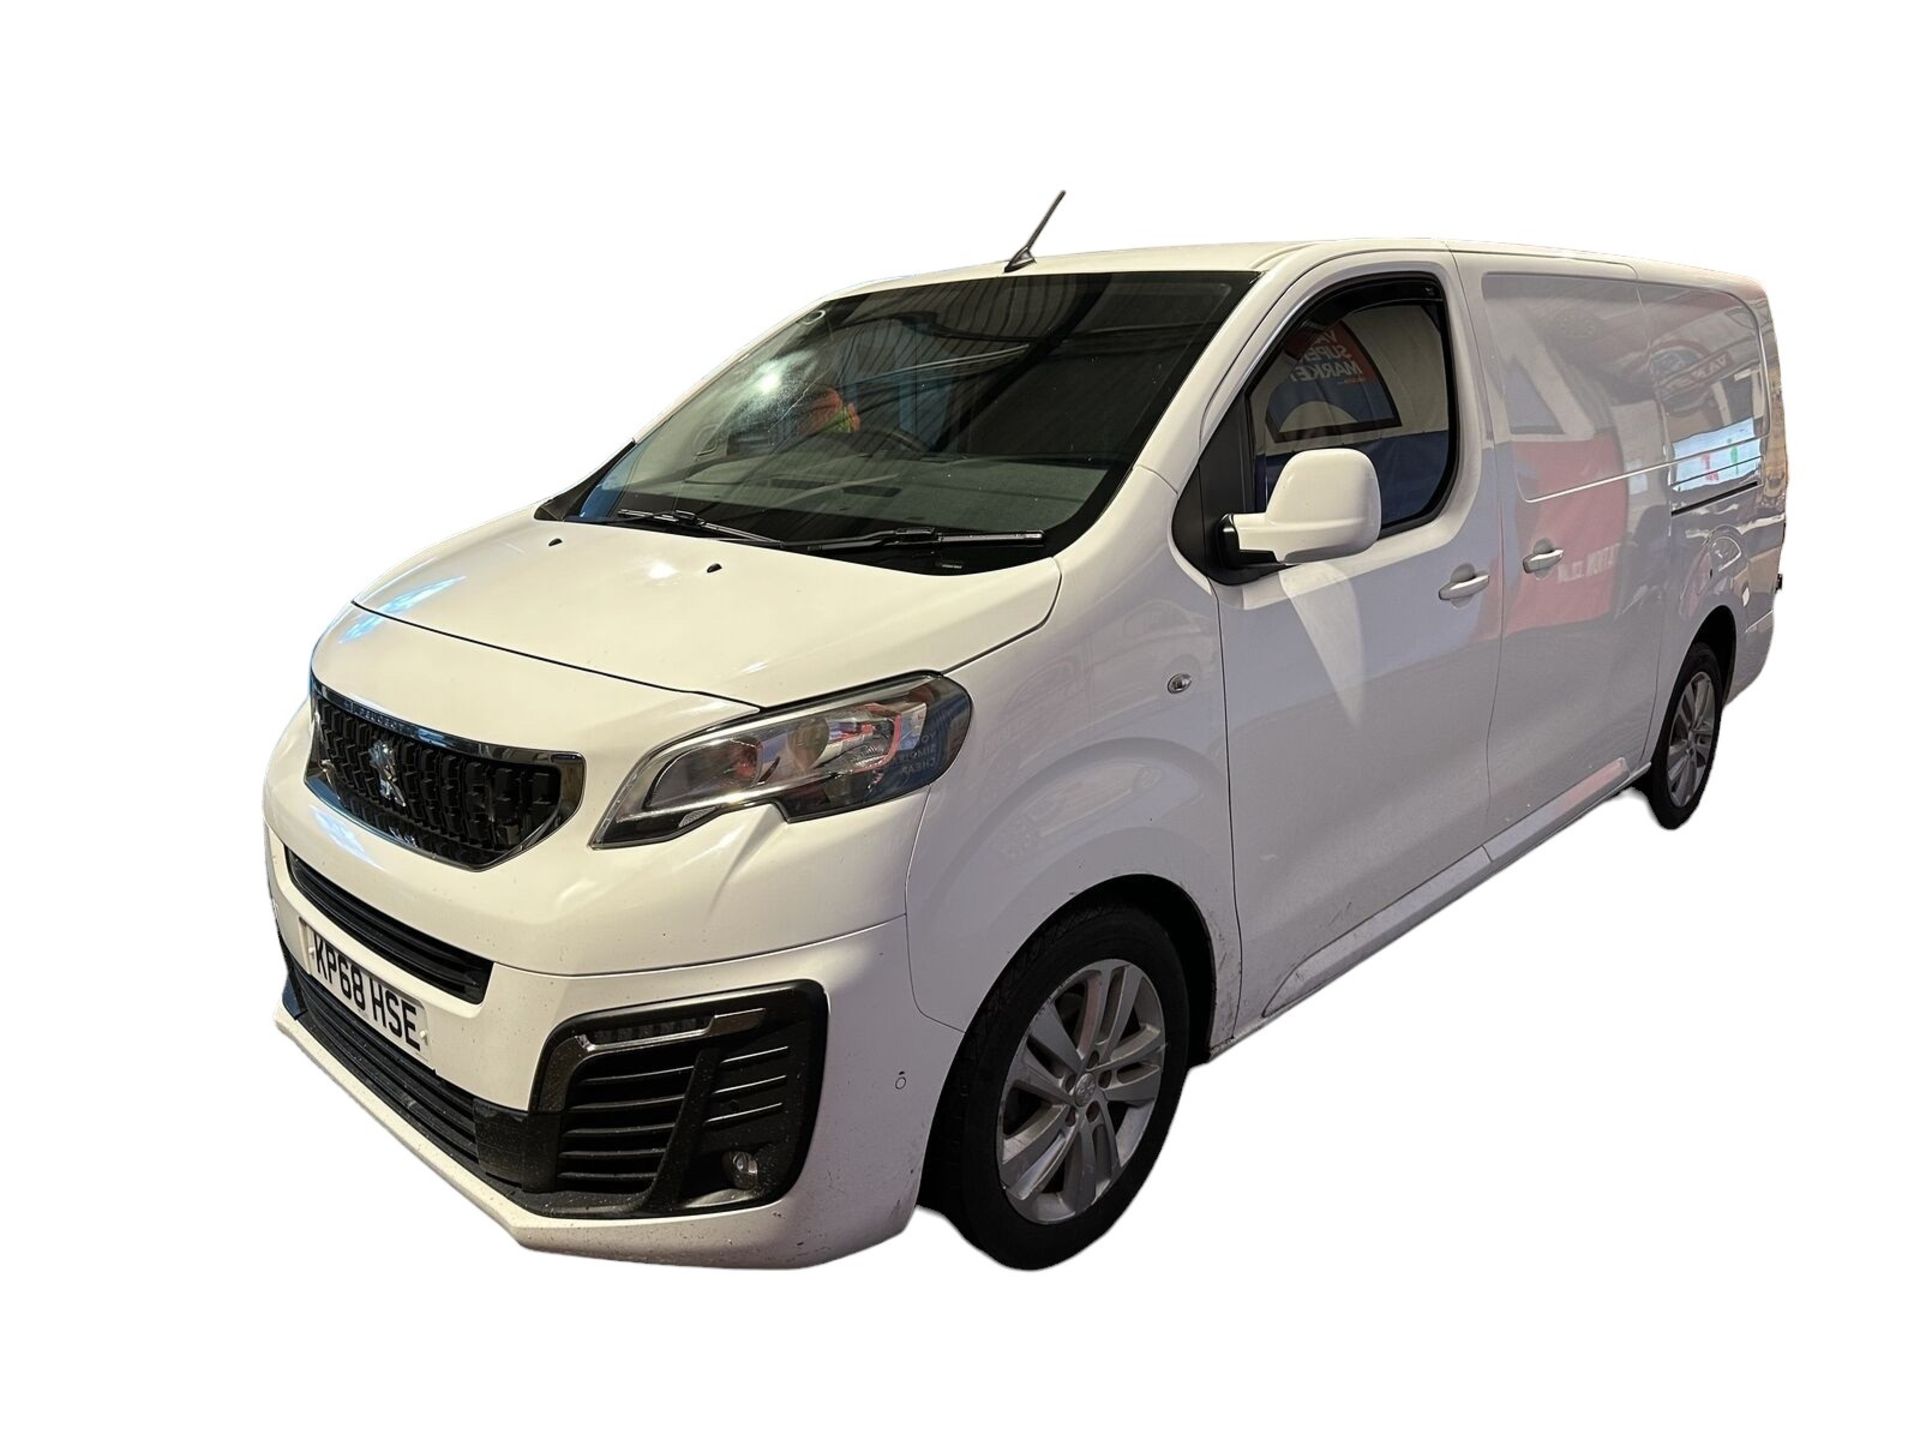 68 PLATE PEUGEOT EXPERT, AUTO, IMMACULATE BEAUTY >>--NO VAT ON HAMMER--<<